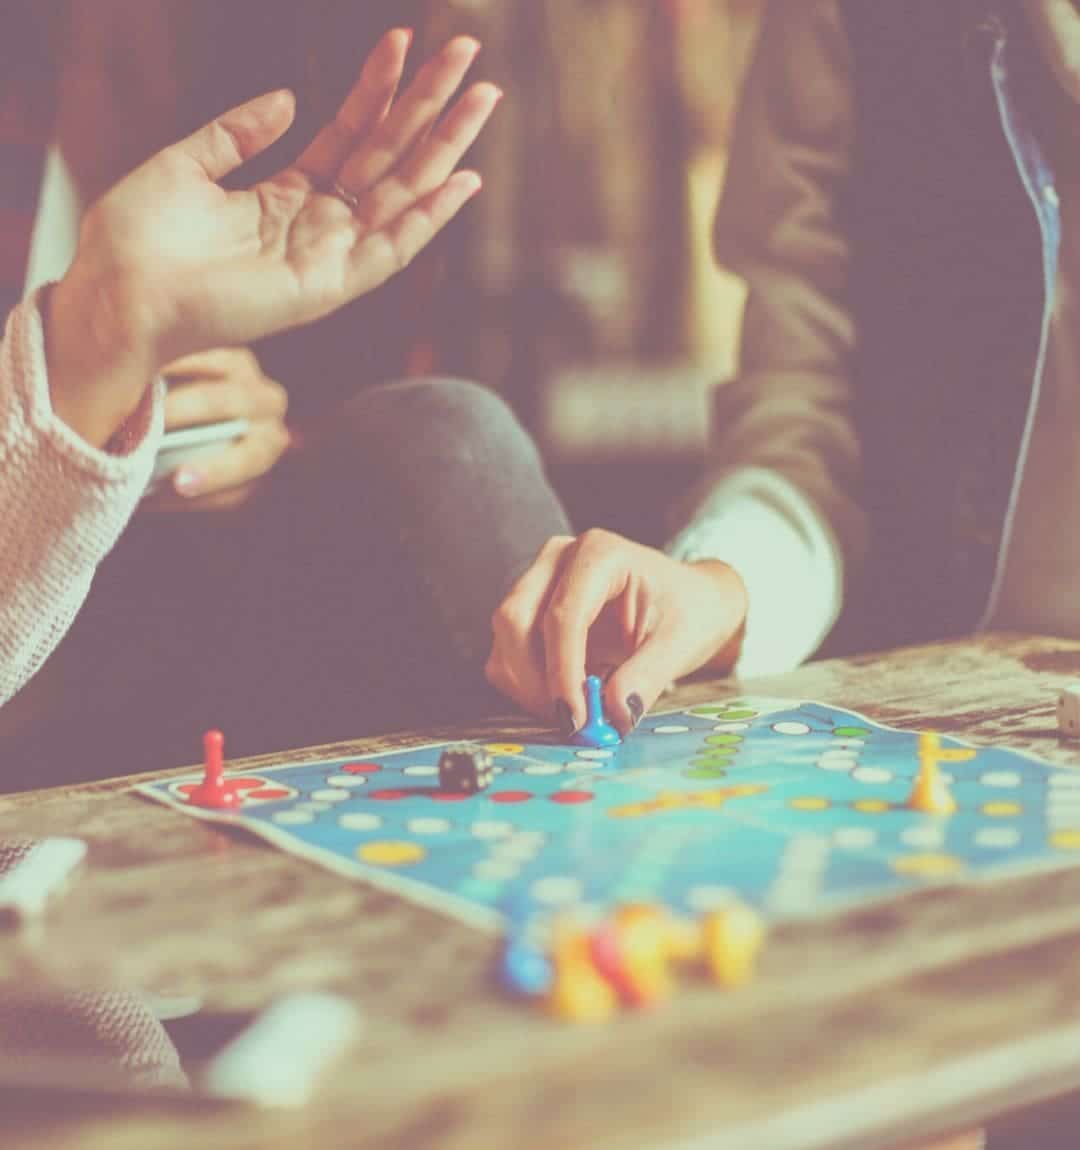 benefits of board games for seniors | health benefits of board games | health benefits of playing board games